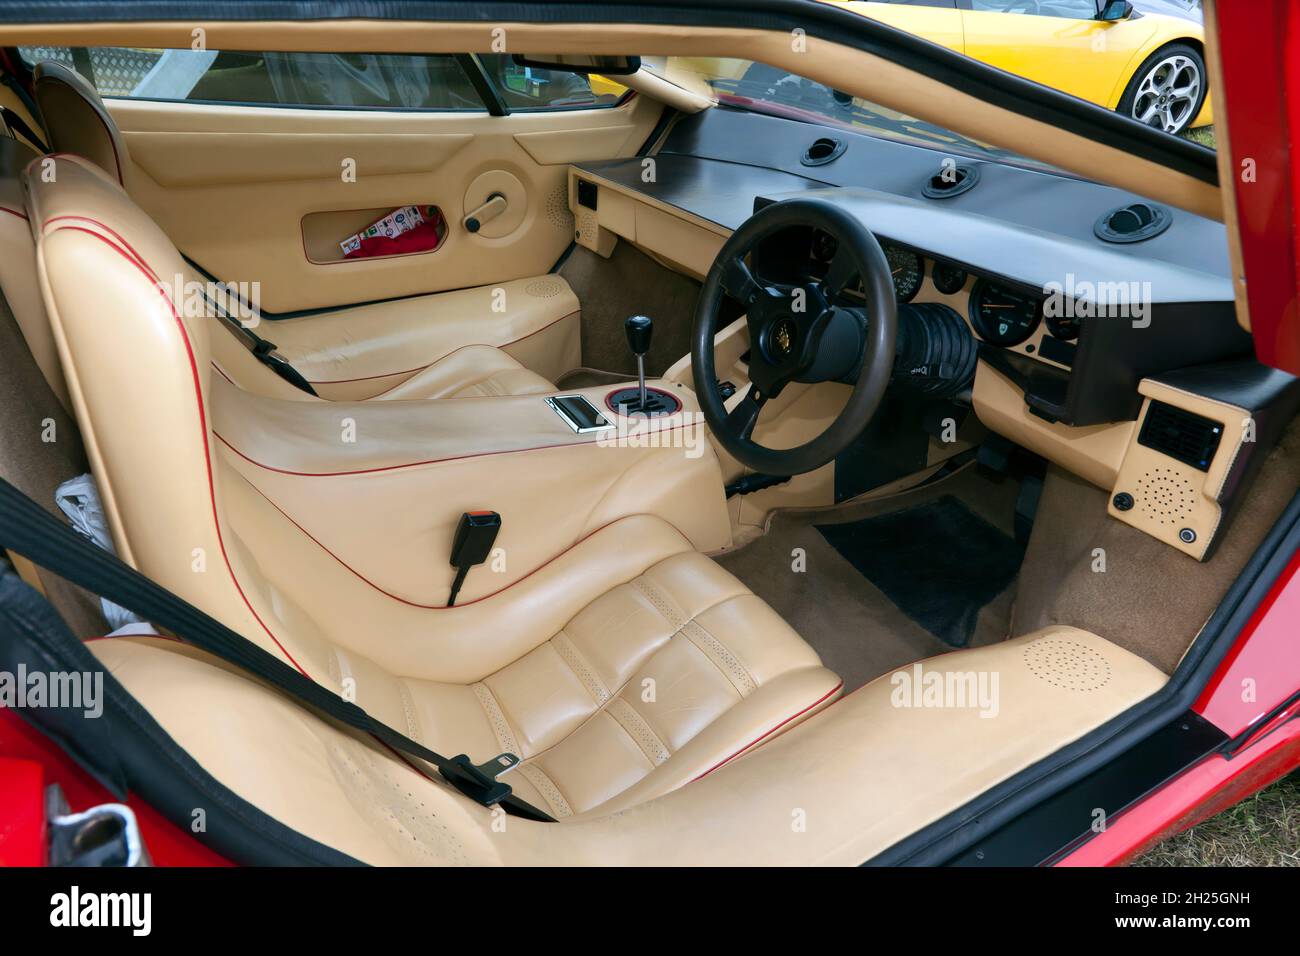 Interior view of a 1988, Red Lamborghini Countach, on display at the 2021 London Classic Car Show Stock Photo